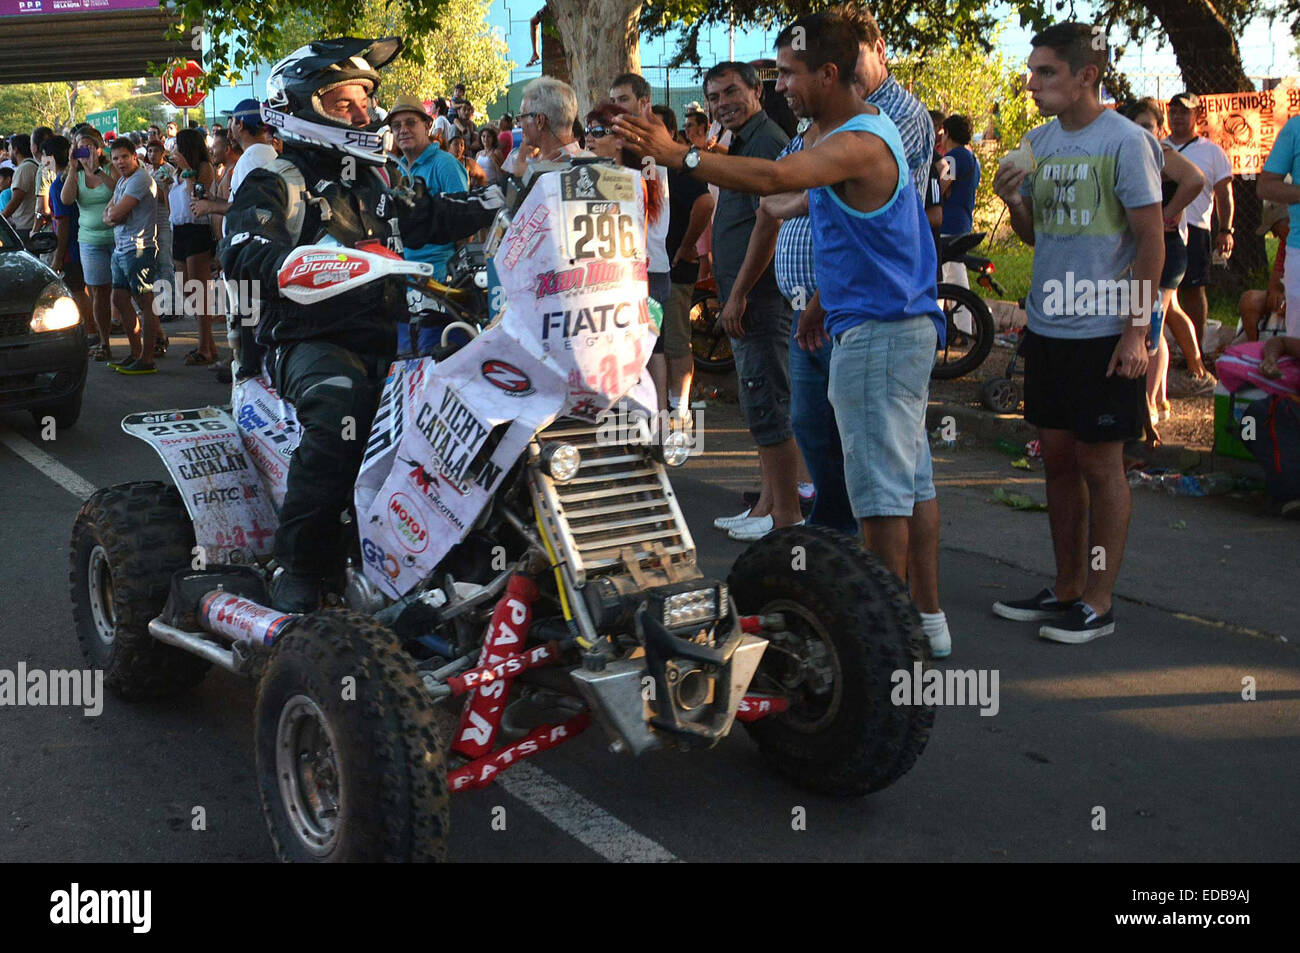 Cordoba, Cordoba Province of Argentina. 4th Jan, 2015. People welcome pilot Xavier Moreno of Spain at the 2015 Dakar Rally in Villa Carlos Paz, Cordoba Province of Argentina, Jan. 4, 2015. The competitors began from Buenos Aires, capital of Argentina, on Jan. 4 their 9,200km rally across Argentina, Bolivia and Chile and back to Buenos Aires on Jan. 17. © Irma Montiel/TELAM/Xinhua/Alamy Live News Stock Photo